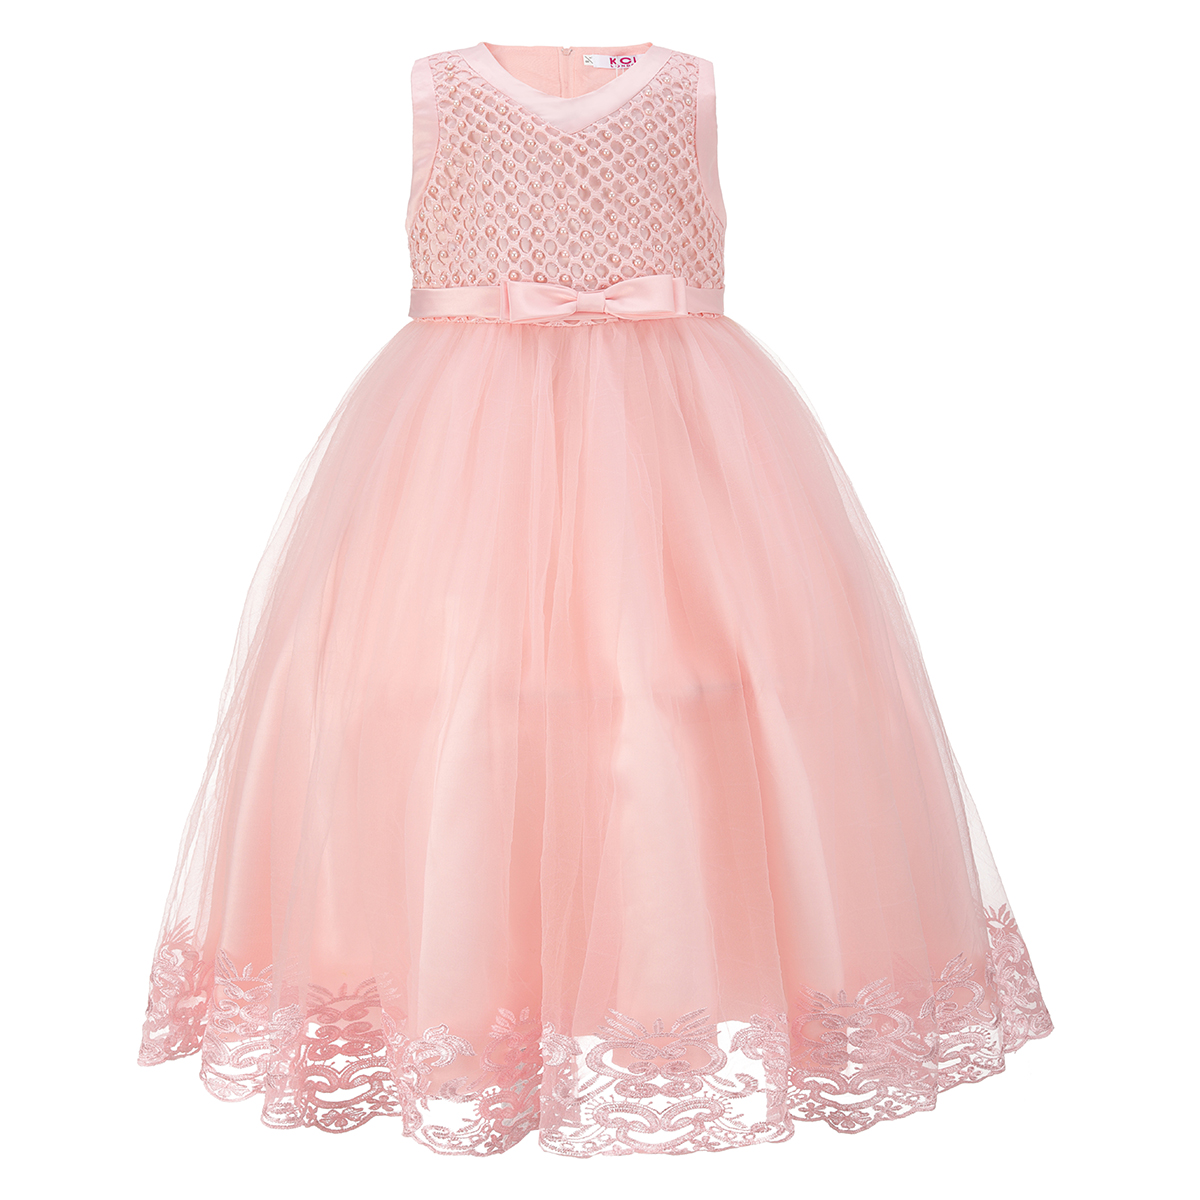 Peach Pearl Embellished Laced Dress